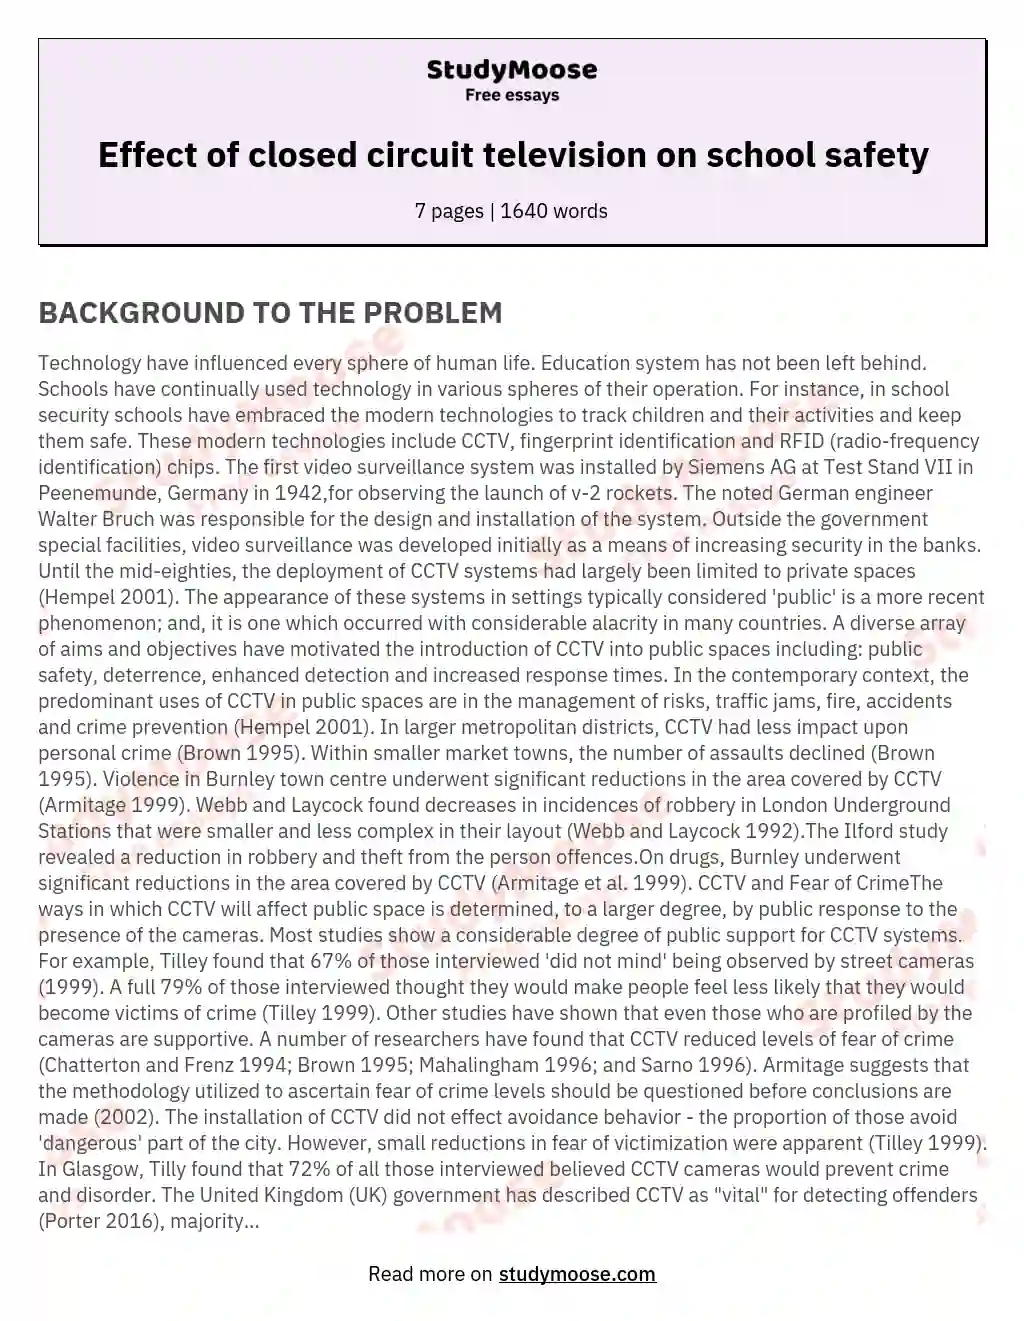 Effect of closed circuit television on school safety essay